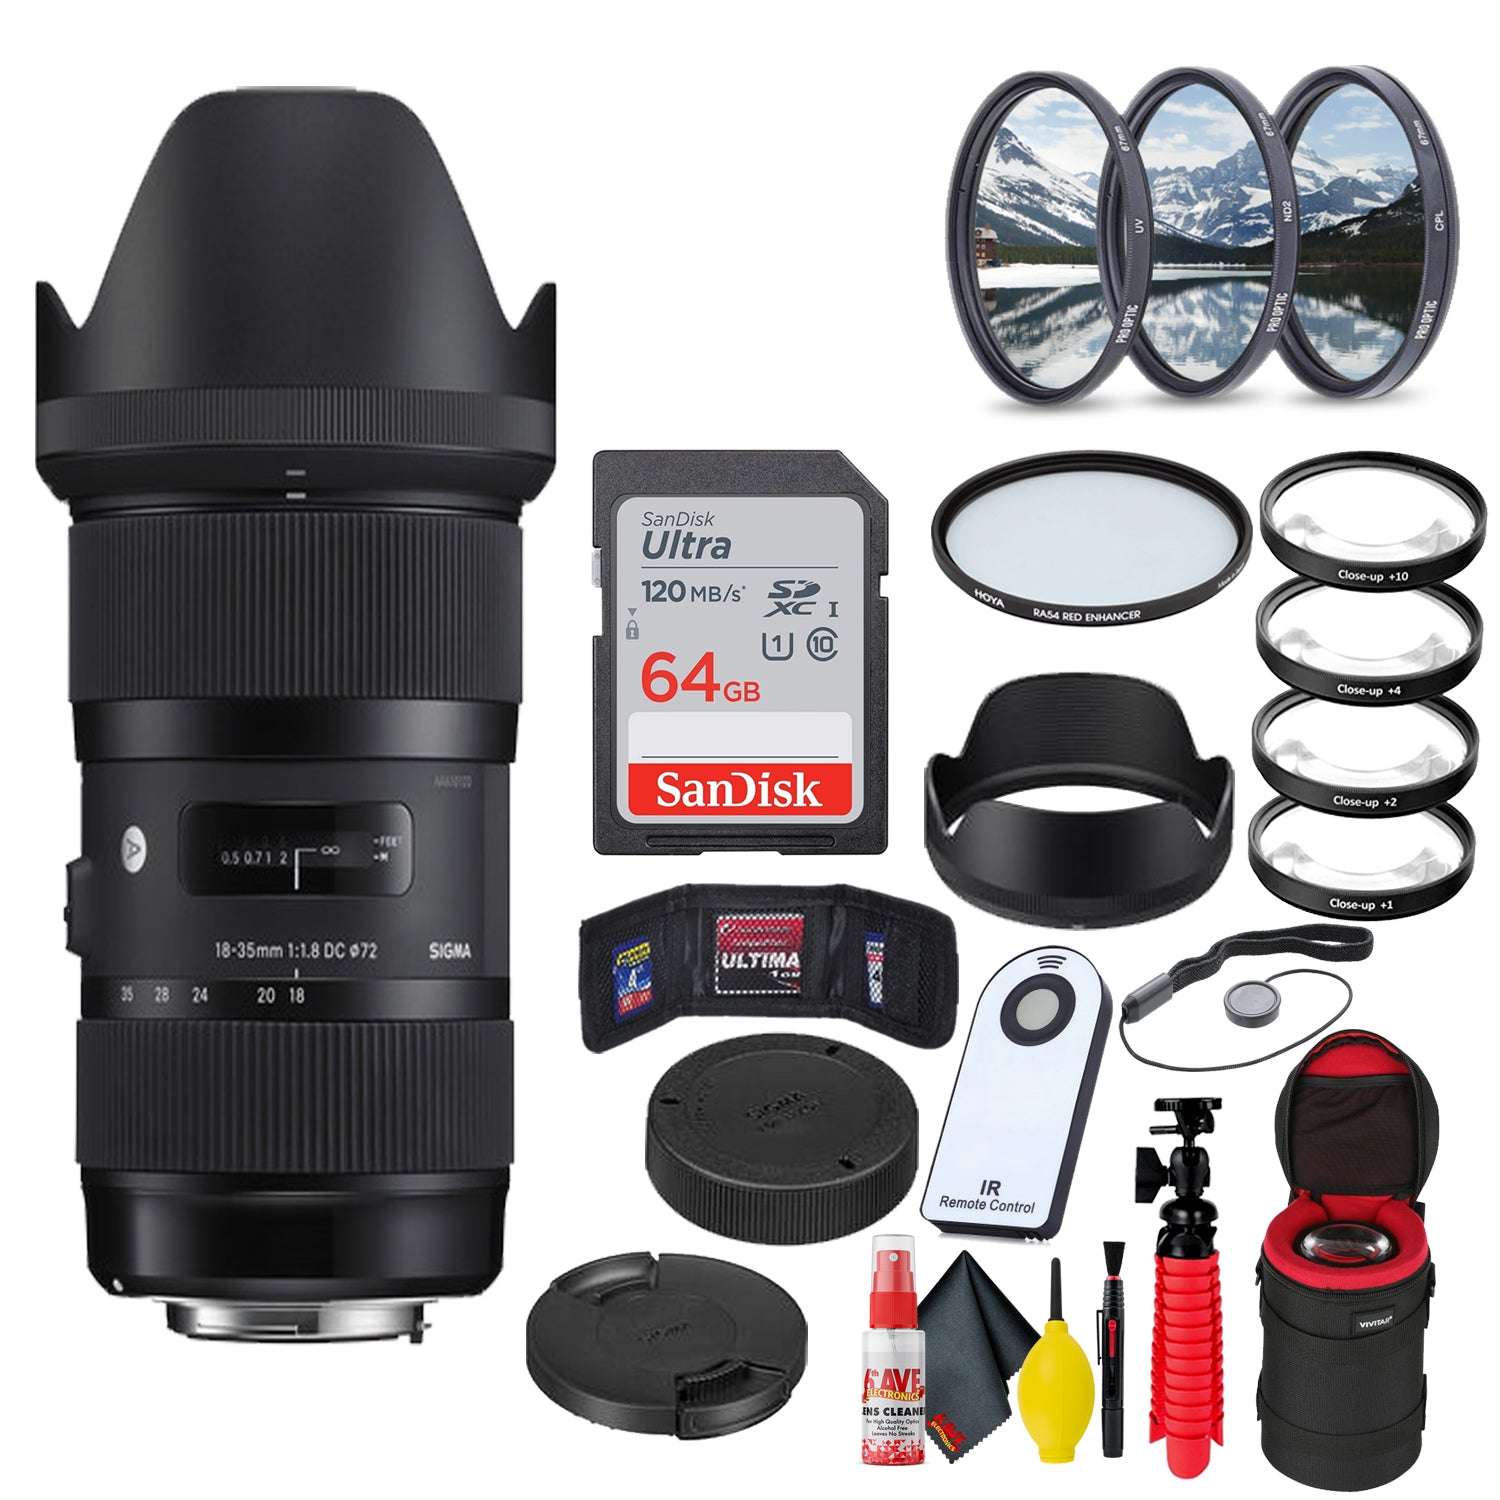 Sigma 18-35mm f/1.8 DC HSM Art Lens for Canon EF + 64GB SD Card Bundle